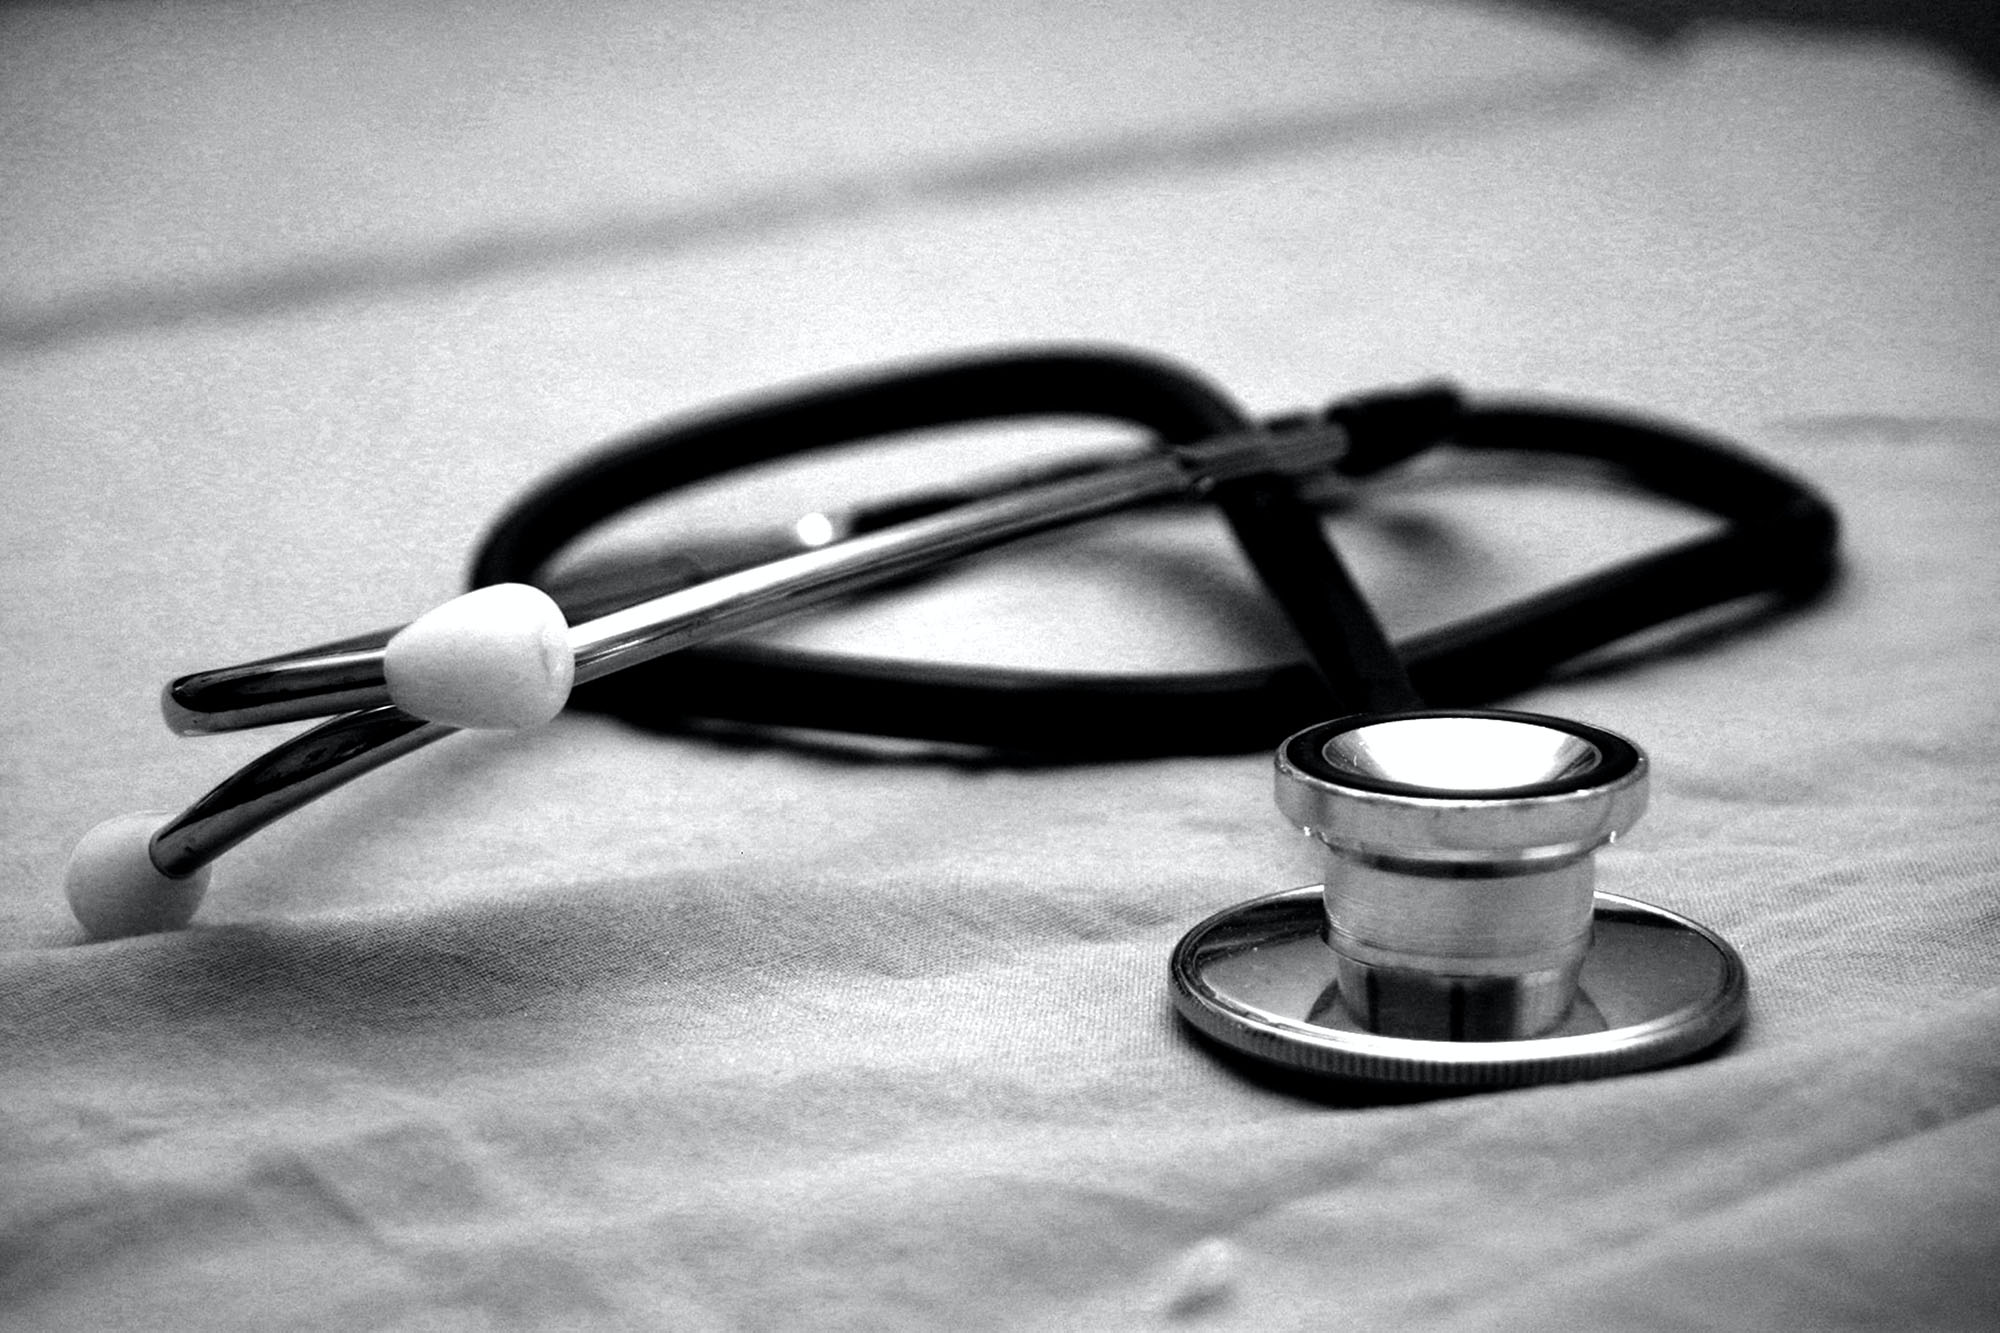 Black and white photo of a stethoscope laying on a linen cloth.